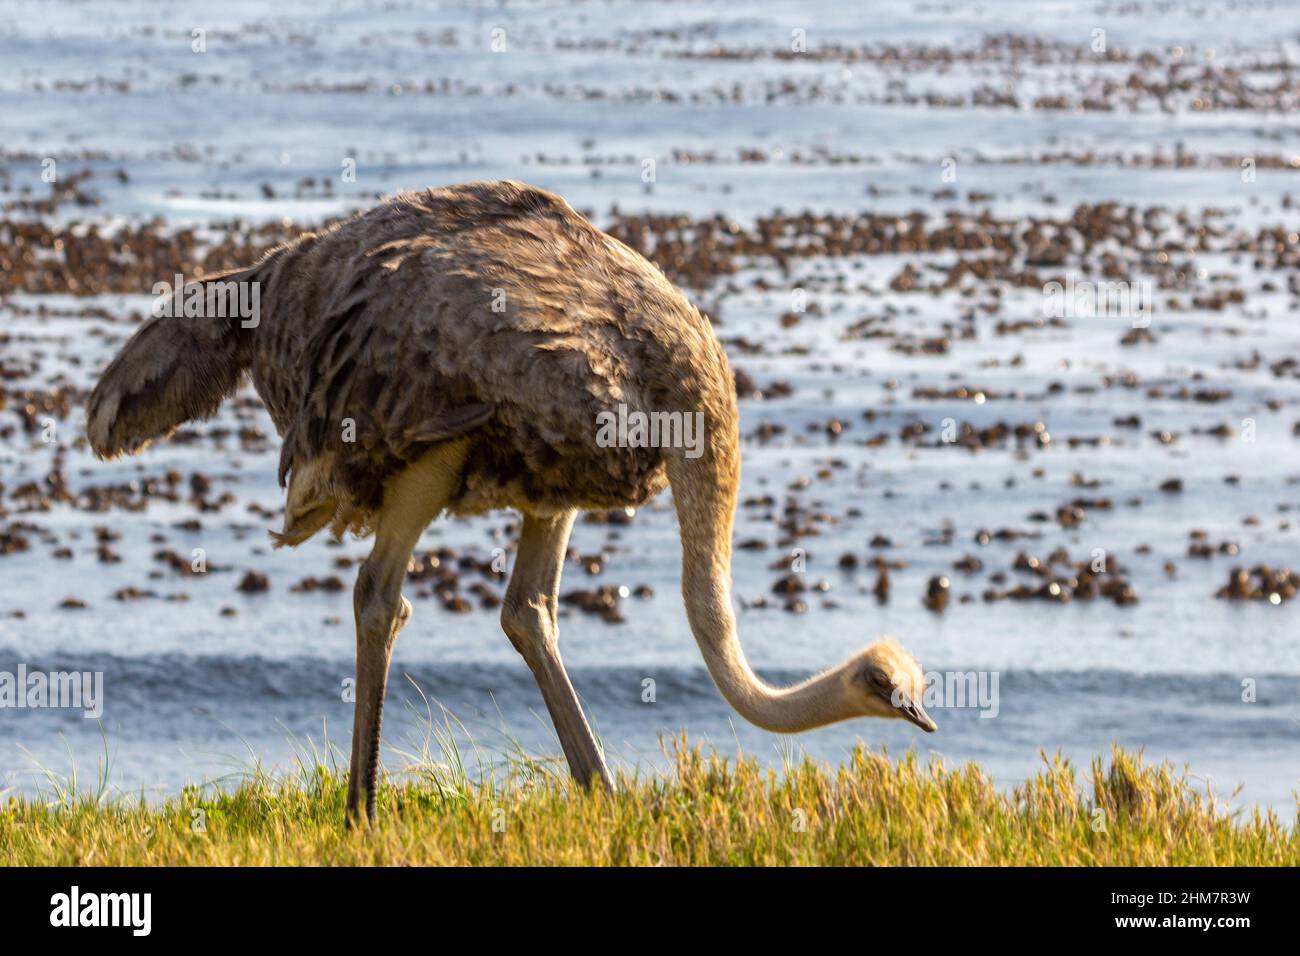 South African Wildlife: Common Ostrich south of Cape Town, Western Cape of South Africa Stock Photo